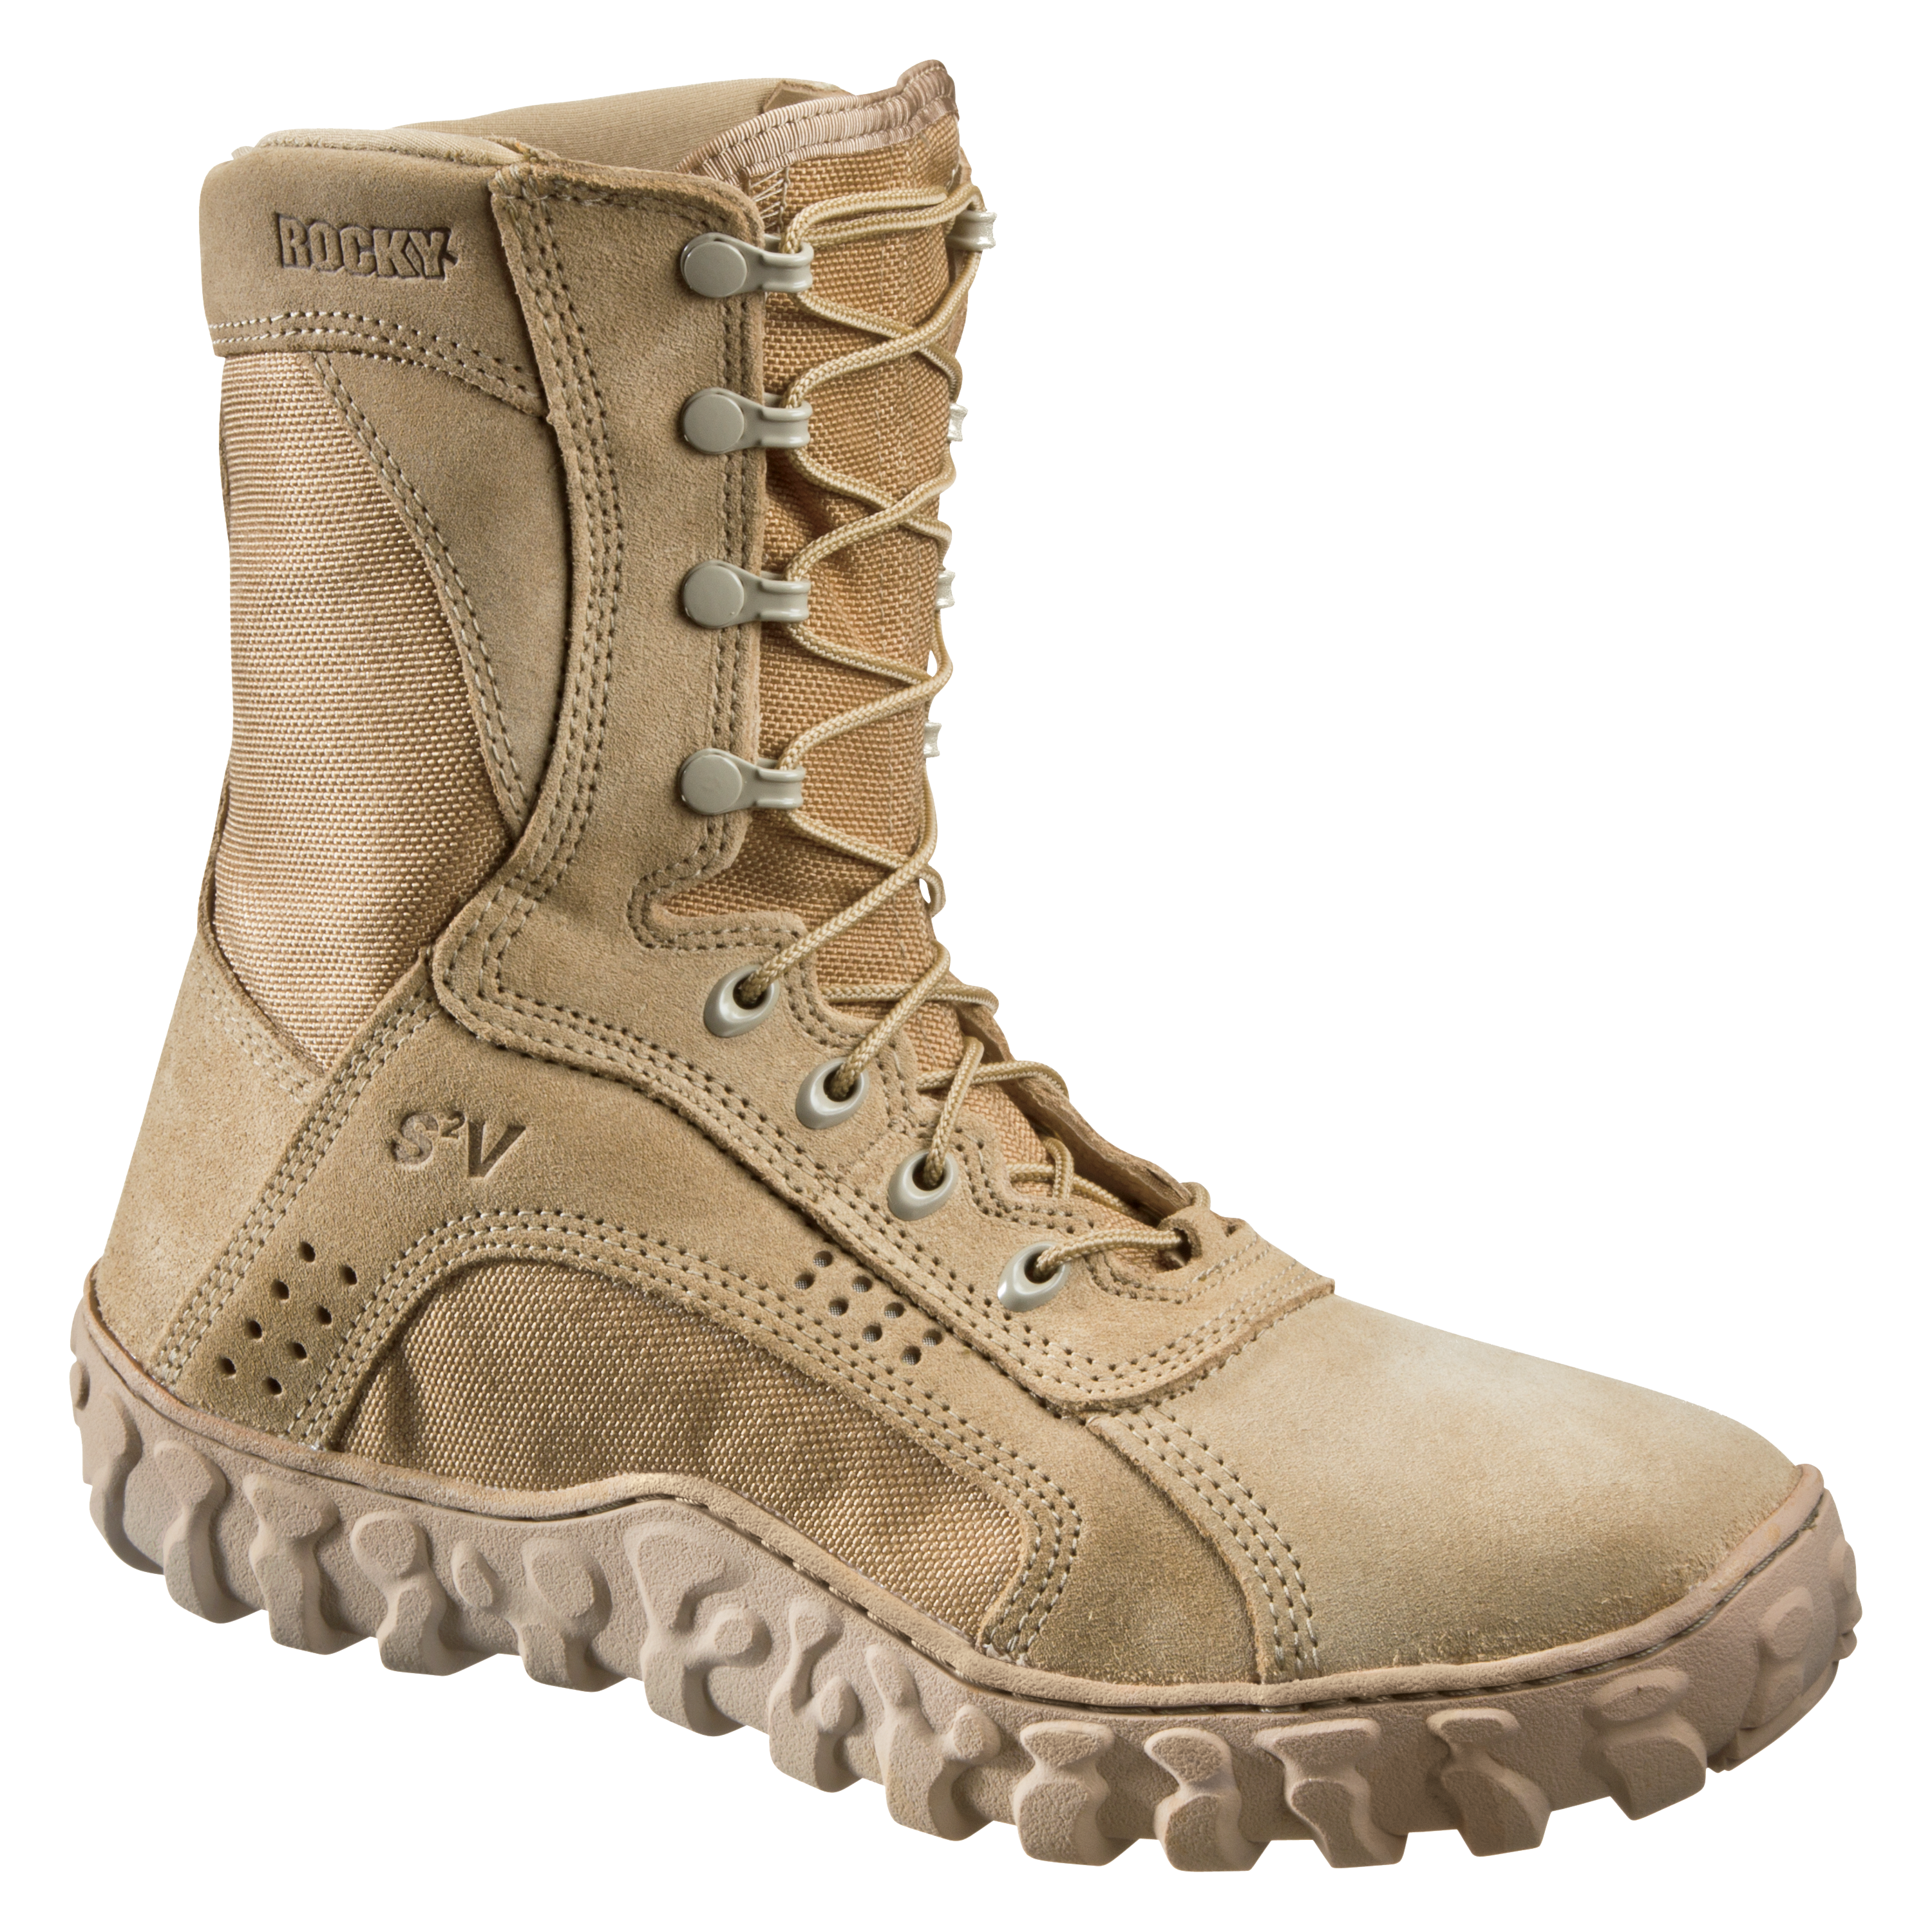 ROCKY S2V Vented Military Duty Boots for Men